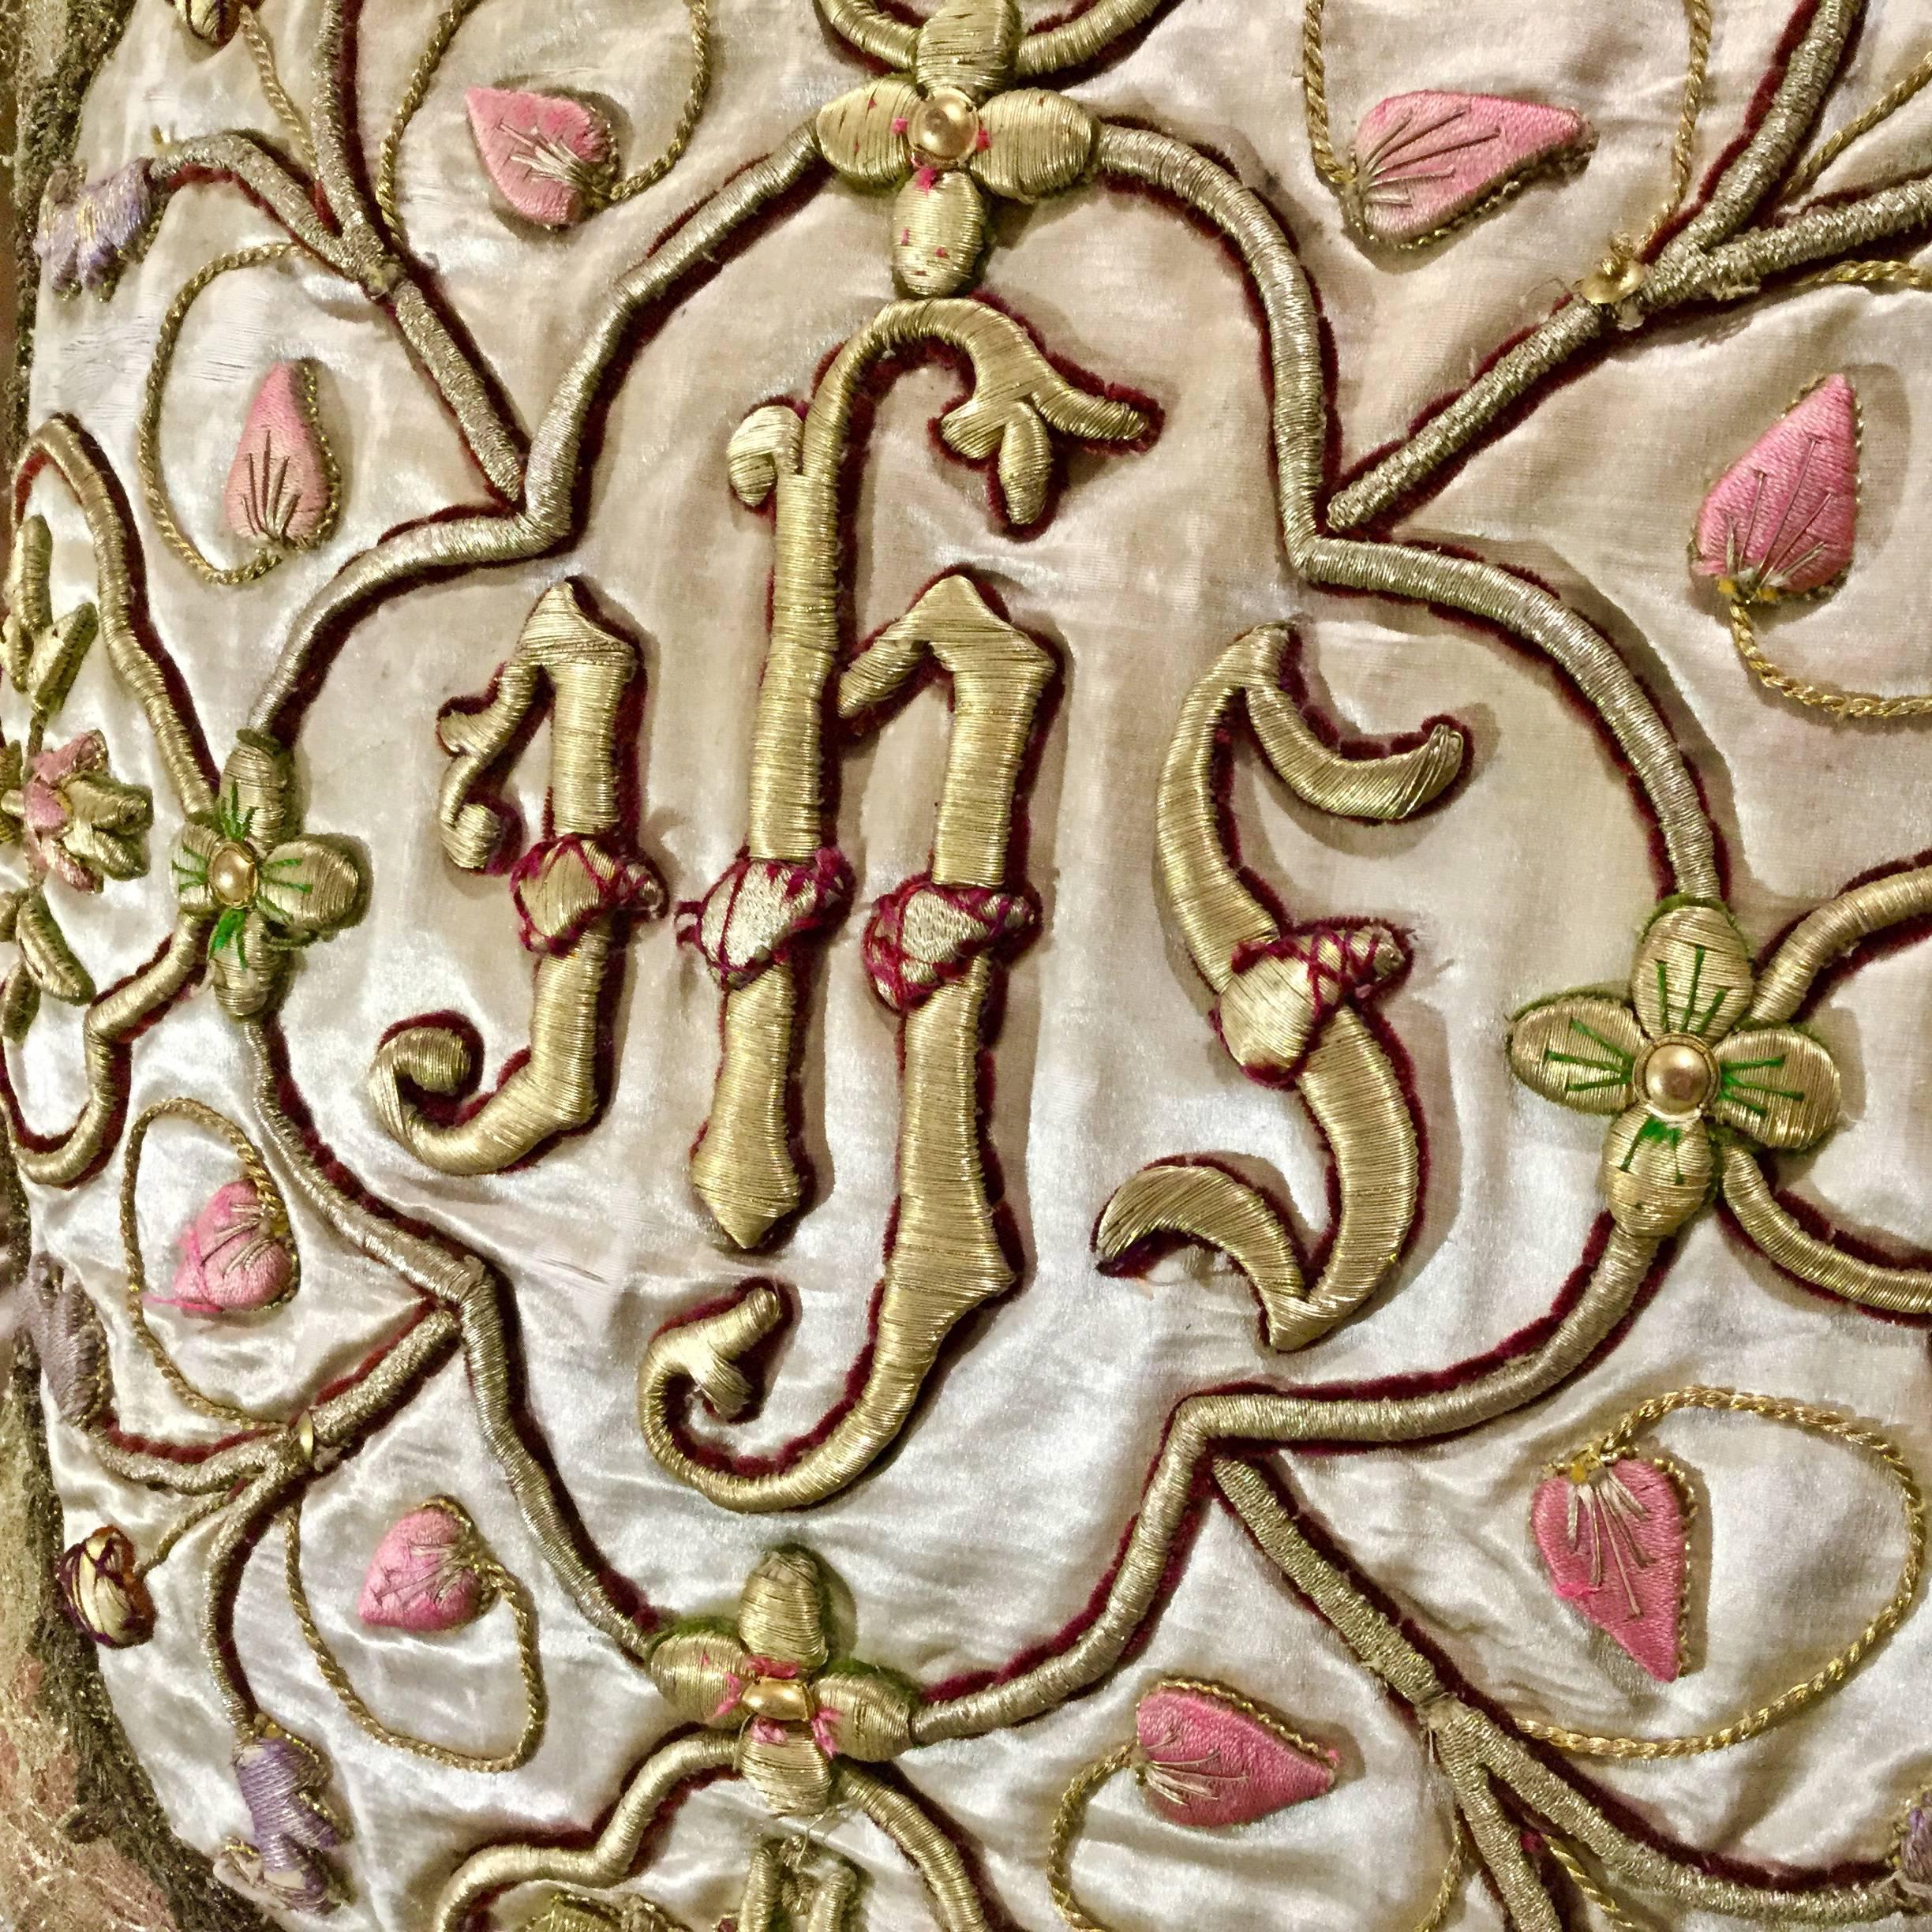 18th century highly embroidered Italian ecclesiastical medallion on its original silk textile, bordered by vintage Italian trim, lace and tassels on Italian pink silk. Pillow crafted by an Italian artisan. Down Filled. One of a kind. Unique creation